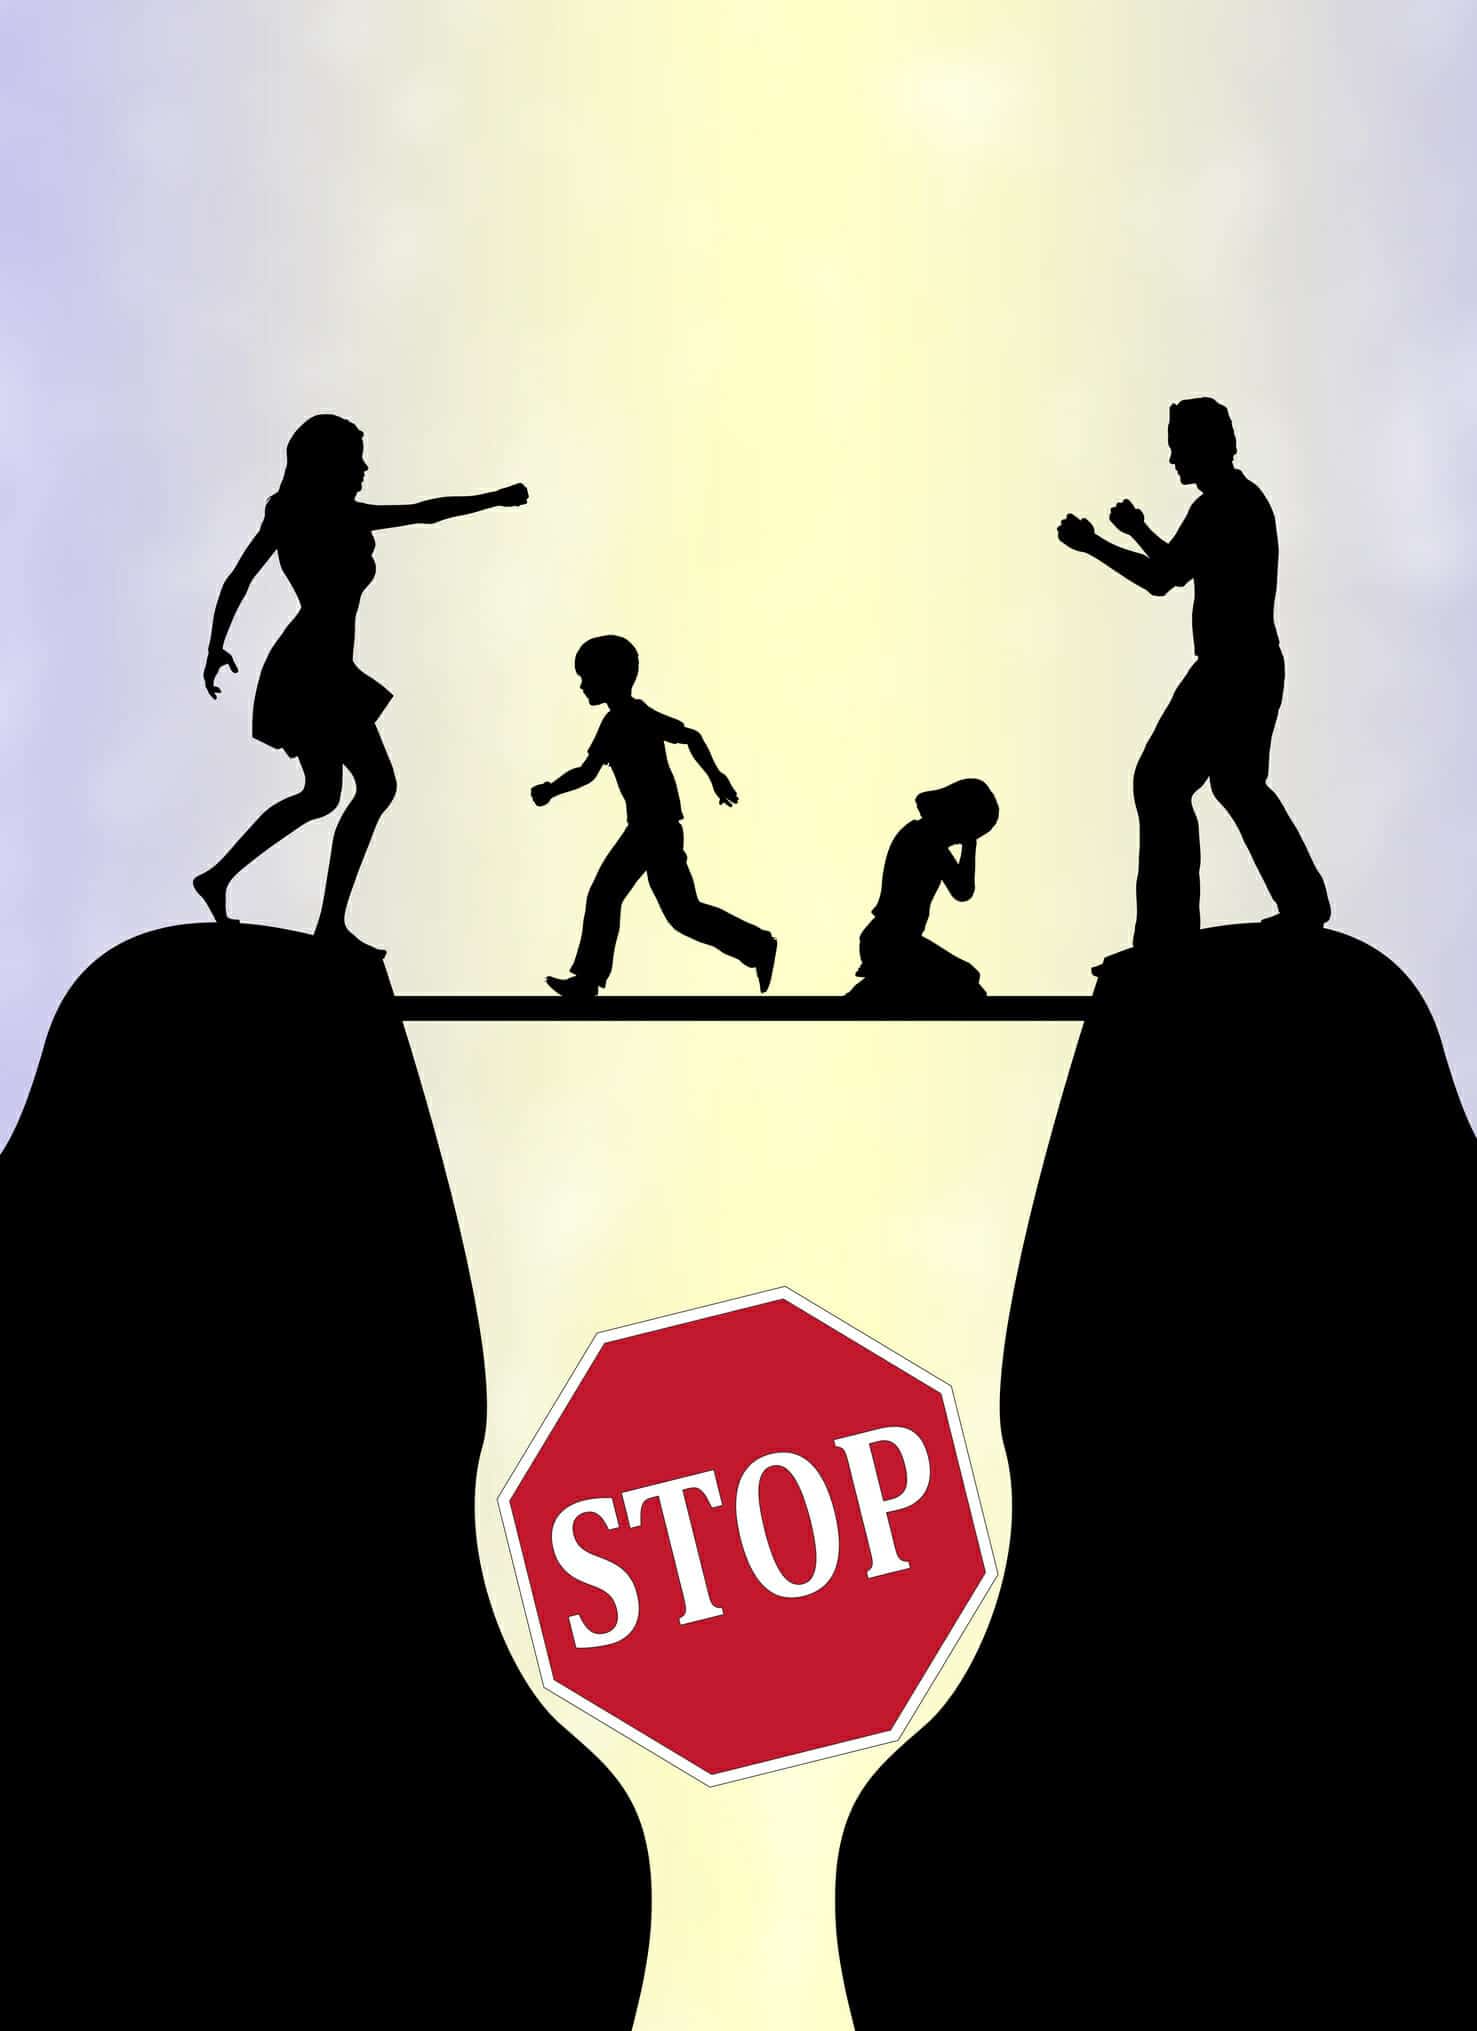 Cartoon silhouette of mom and dad fighting on opposite hills, with their children on a board over the chasm between them and a sign saying "Stop"